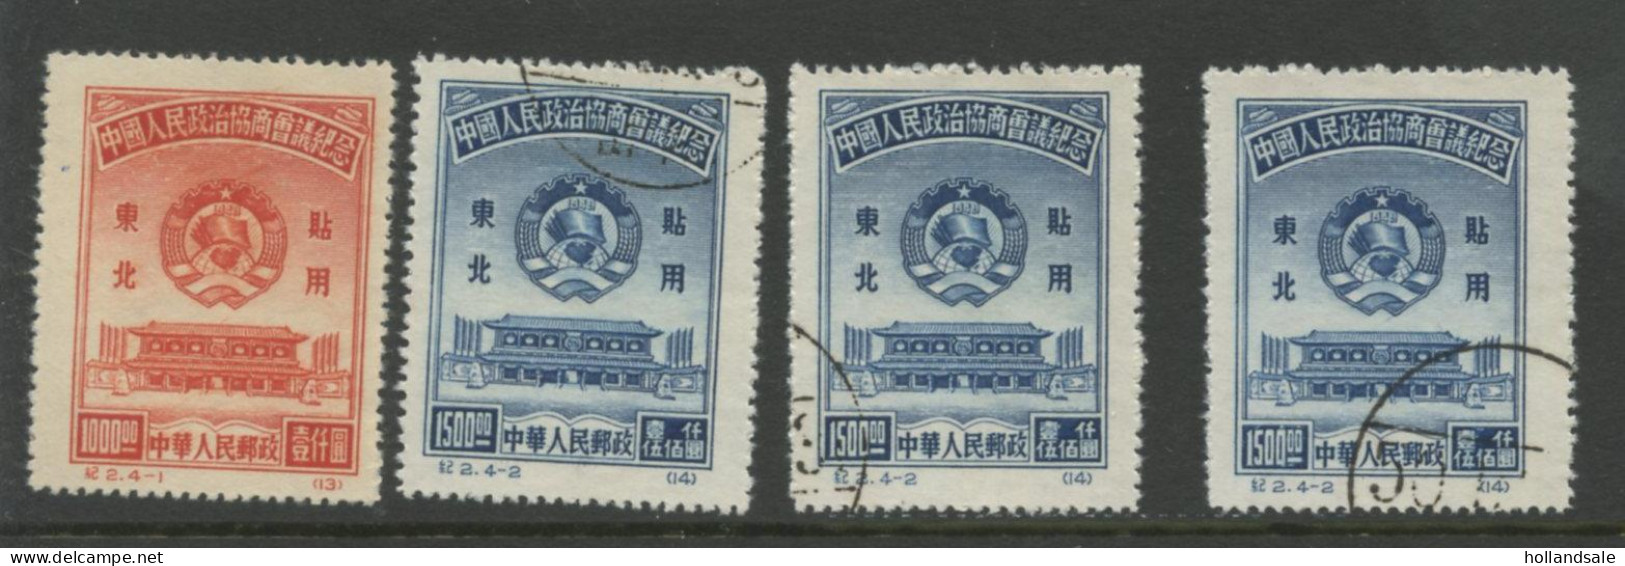 CHINA NORTH-EAST - MICHEL 158 And 159 II (reprints).  158 Unused, Others Used. - Chine Du Nord-Est 1946-48